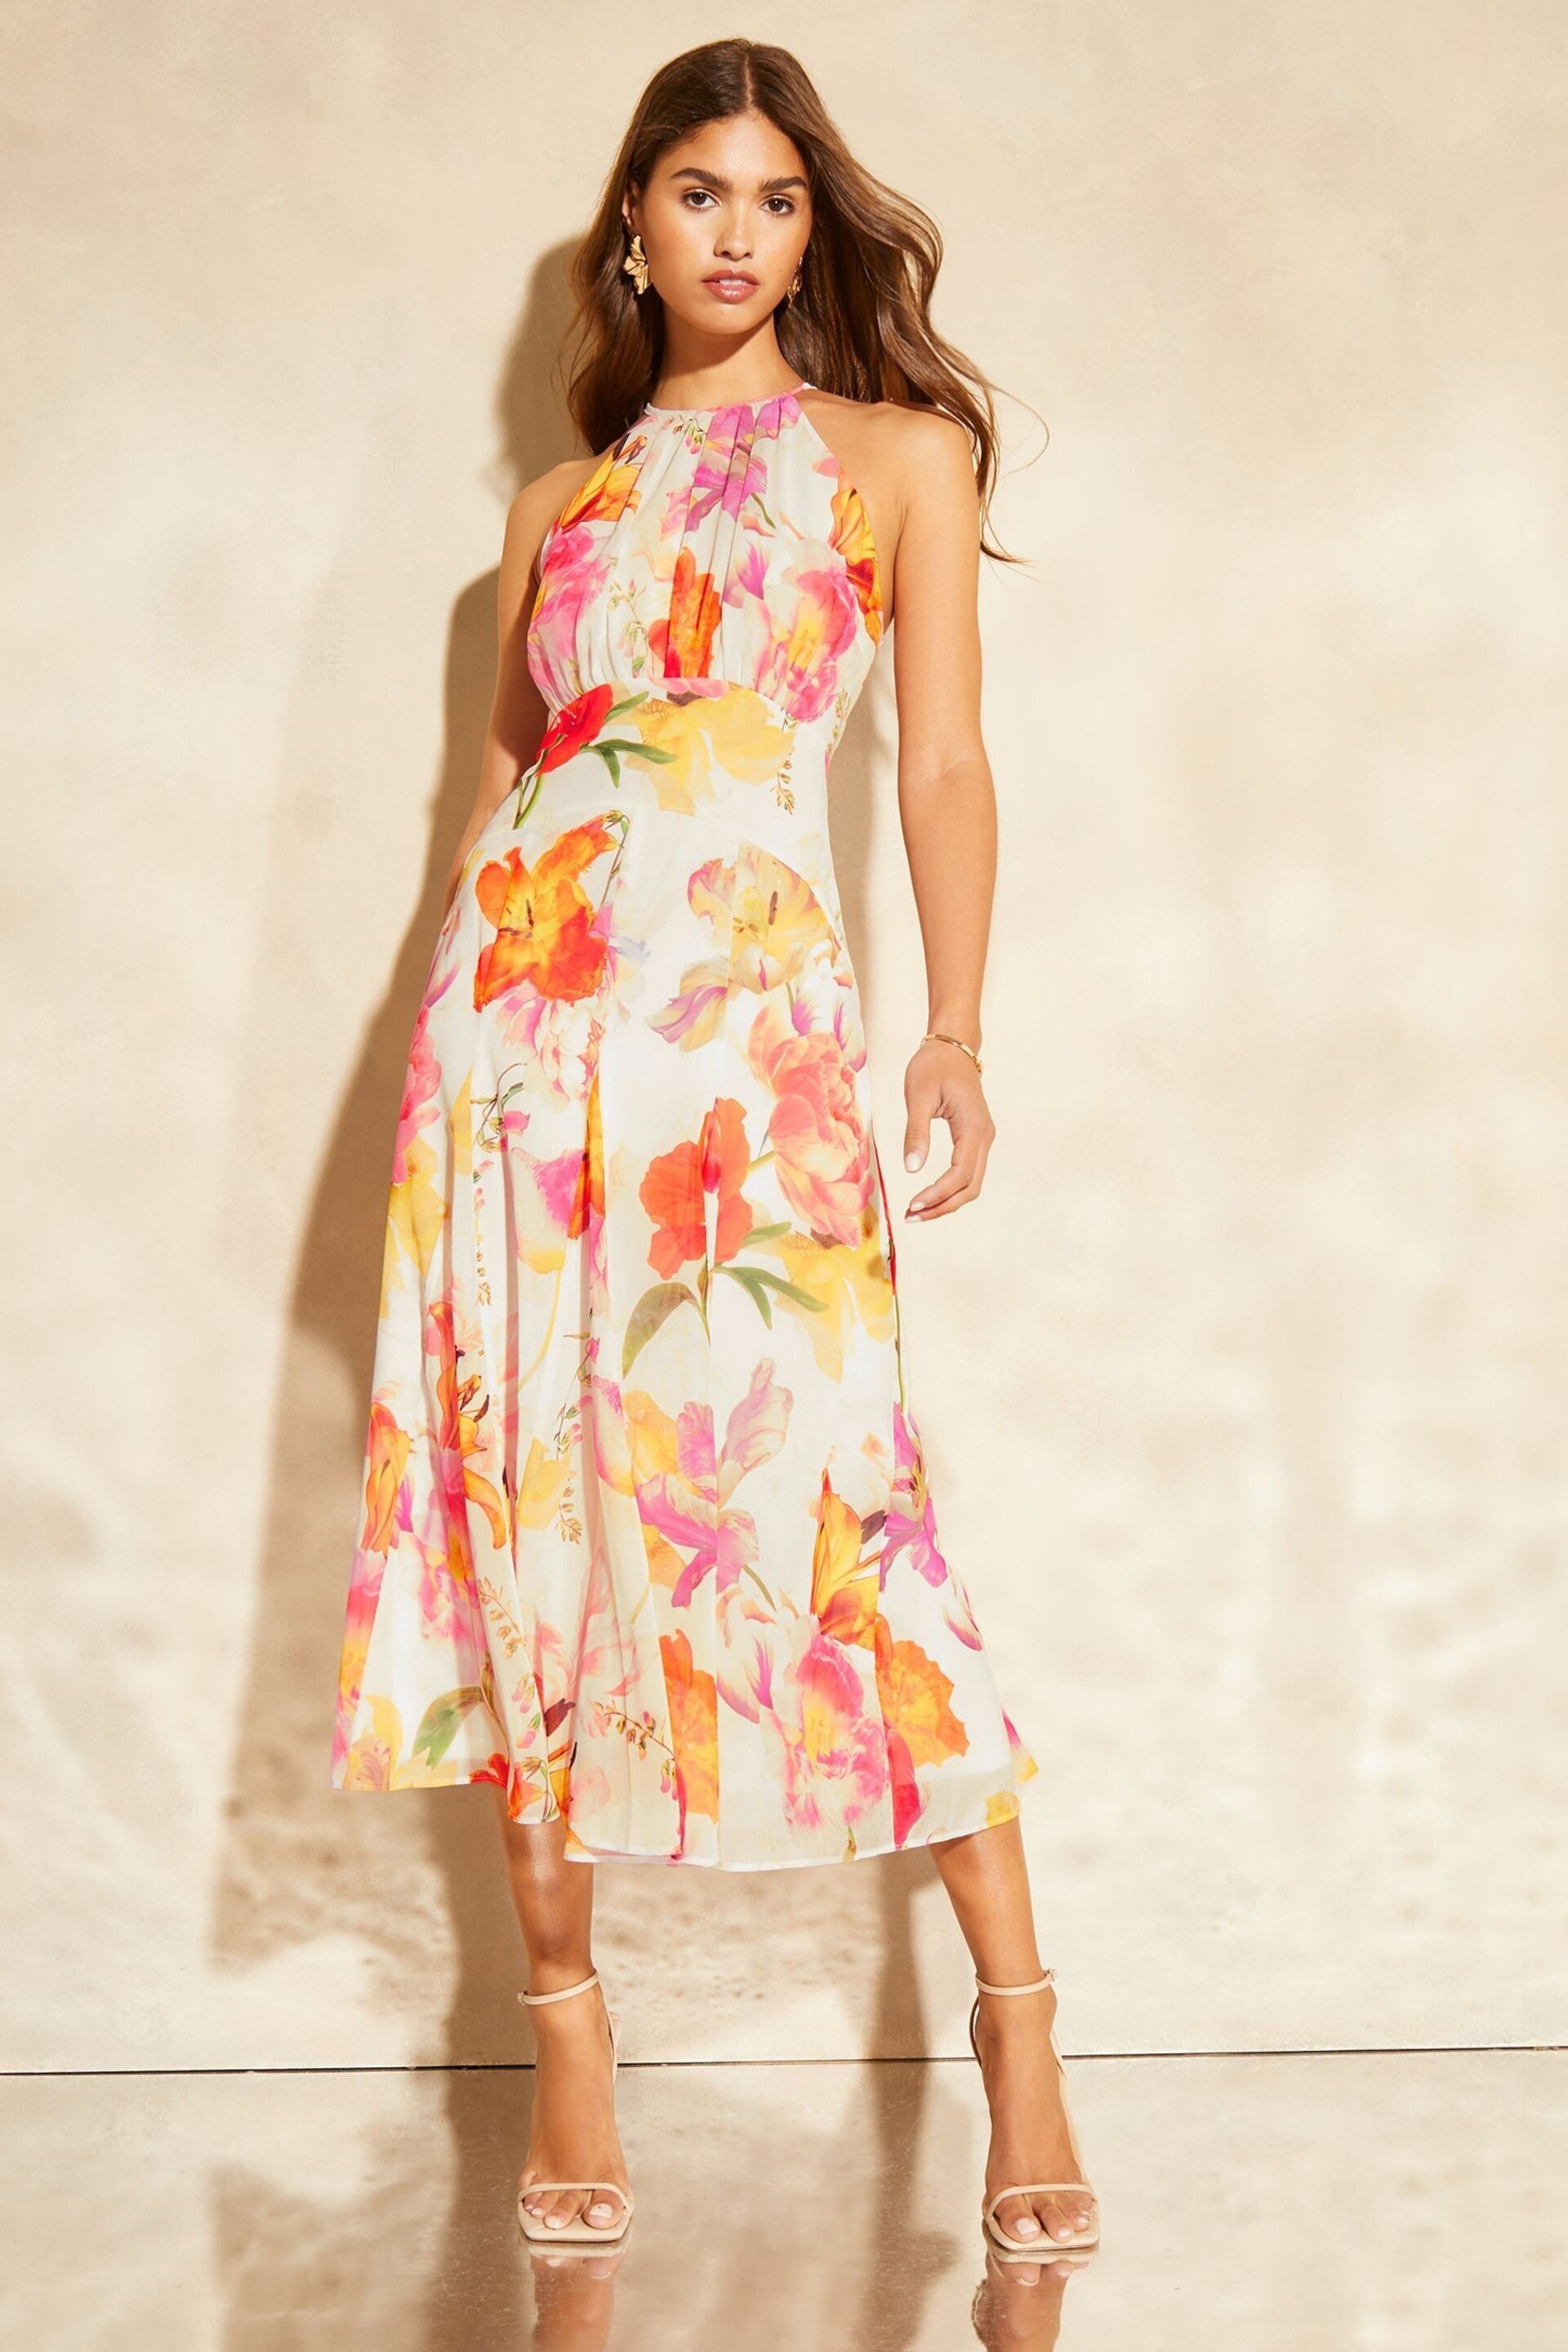 Lipsy White Floral Petite Floral Halter Gathered Waist Midi Dress - Image 1 of 4